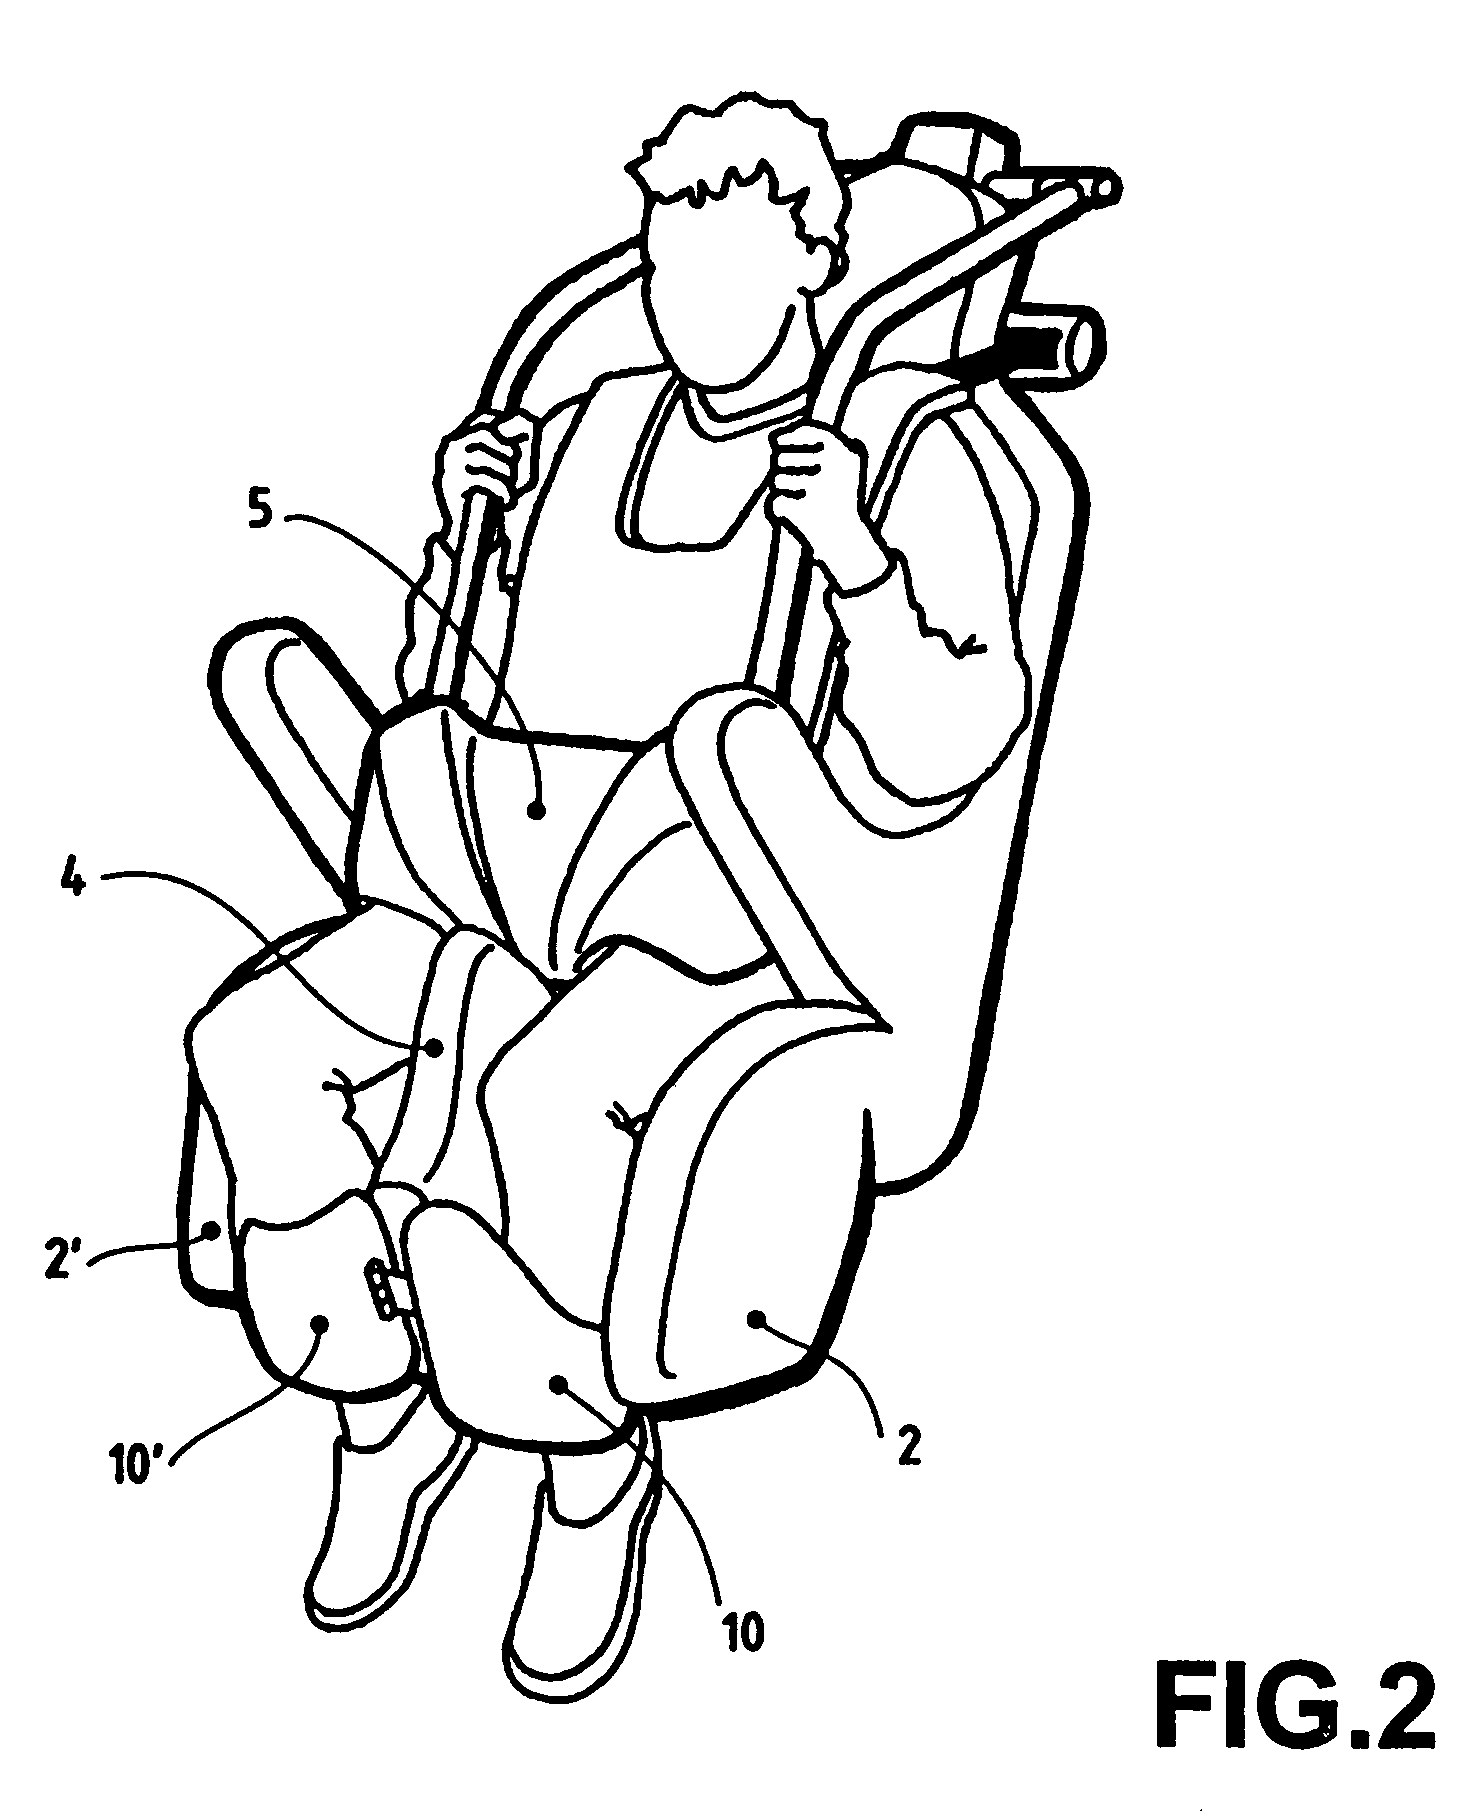 Device for locking the legs of a passenger in a seat